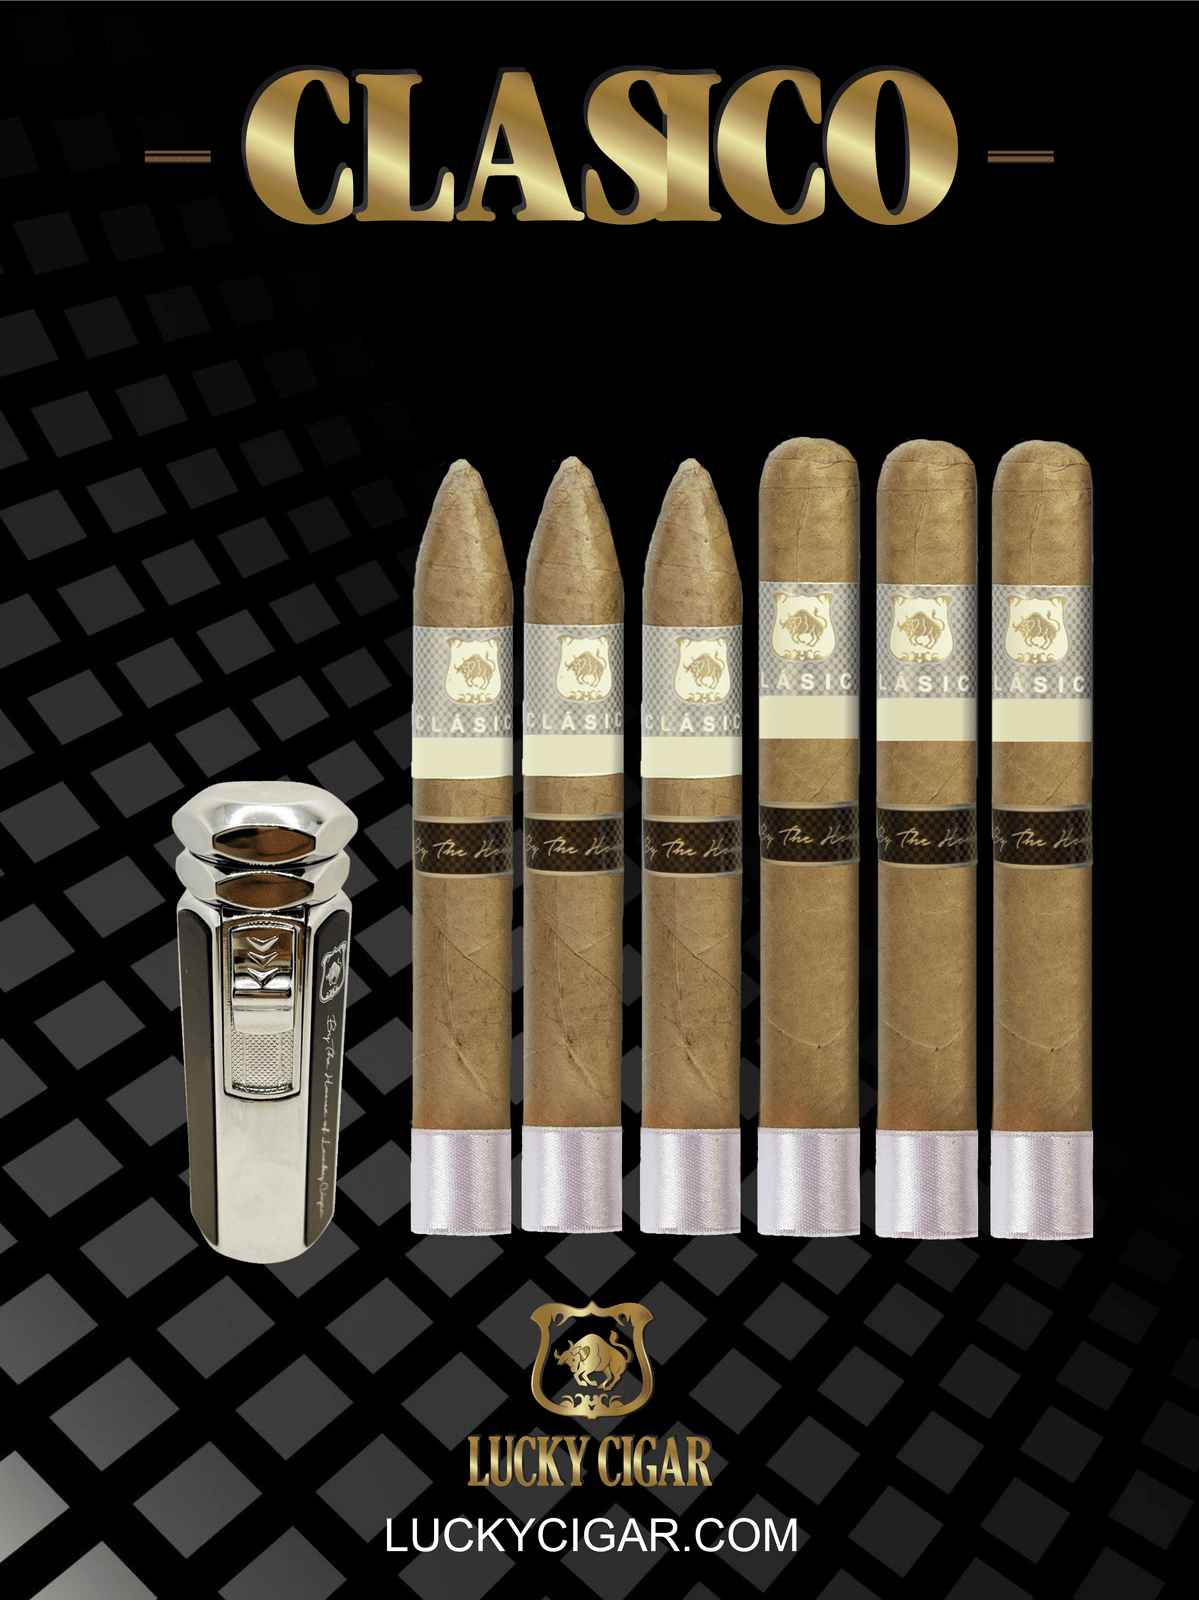 Lucky Cigar Sampler Sets: Set of 6 Classico Cigars, Toro, Torpedo with Torch